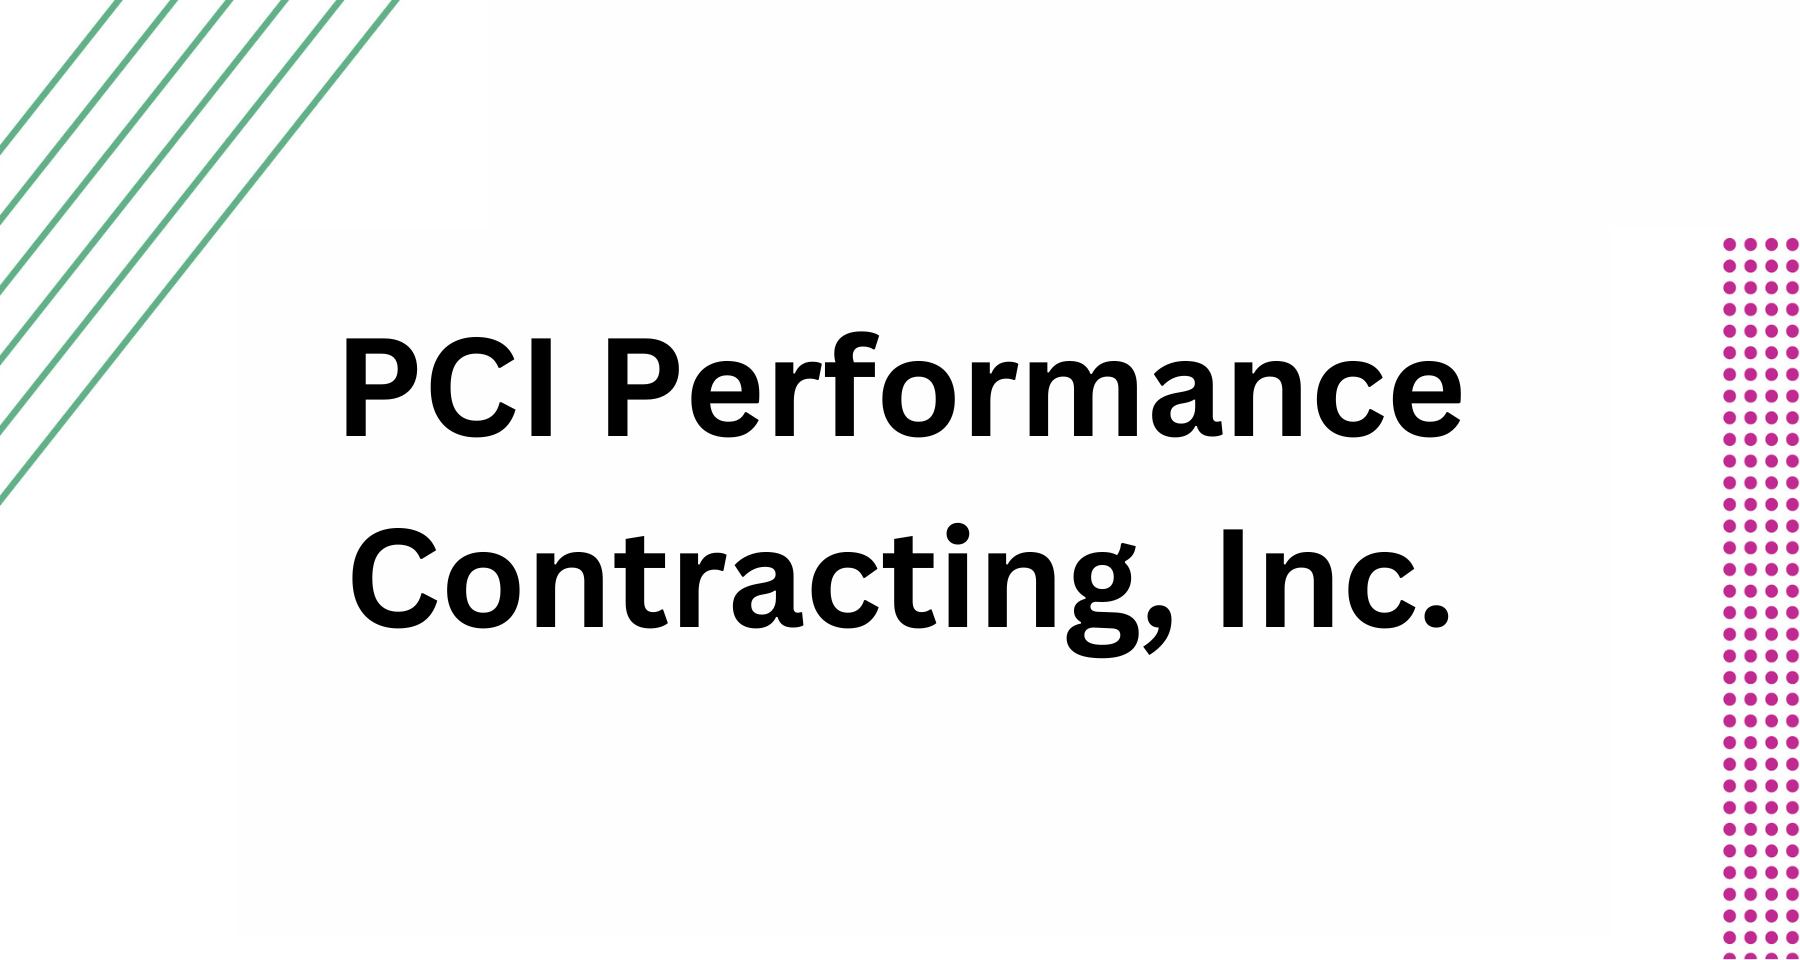 PCI Performance Contracting, Inc.